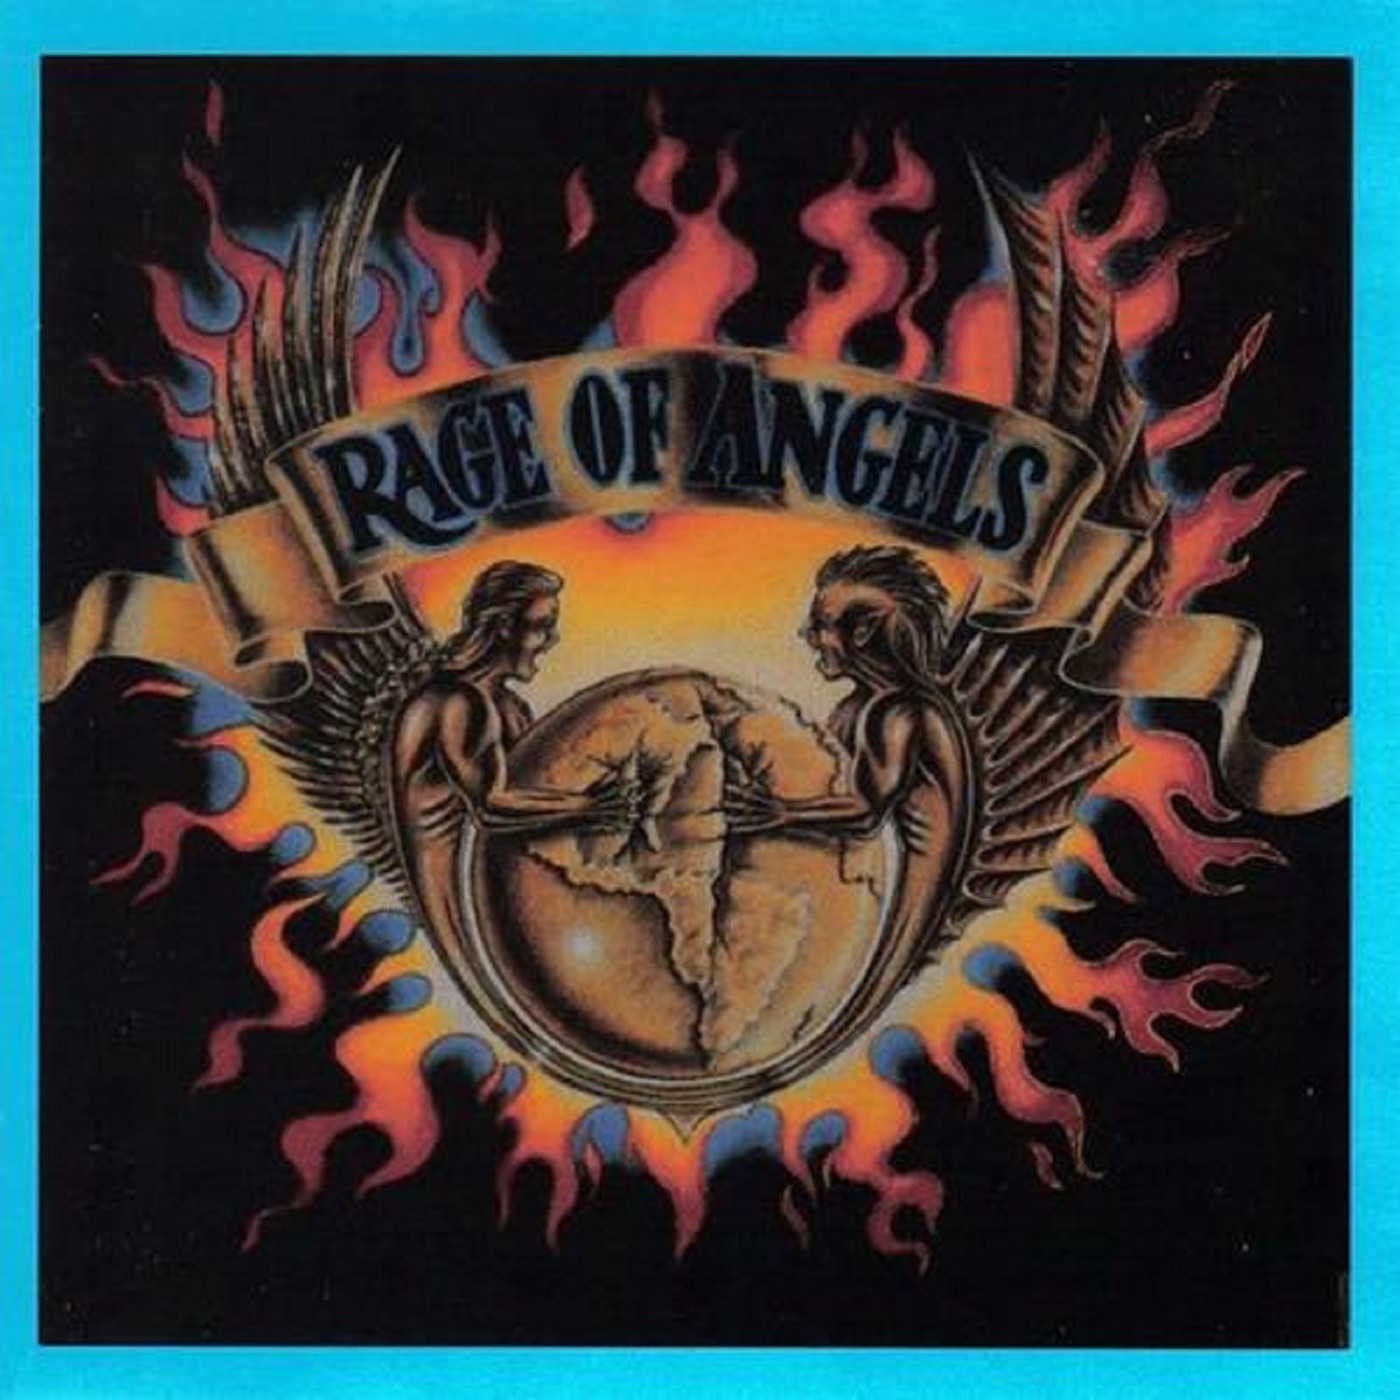 Rage of Angels by Rage of Angels